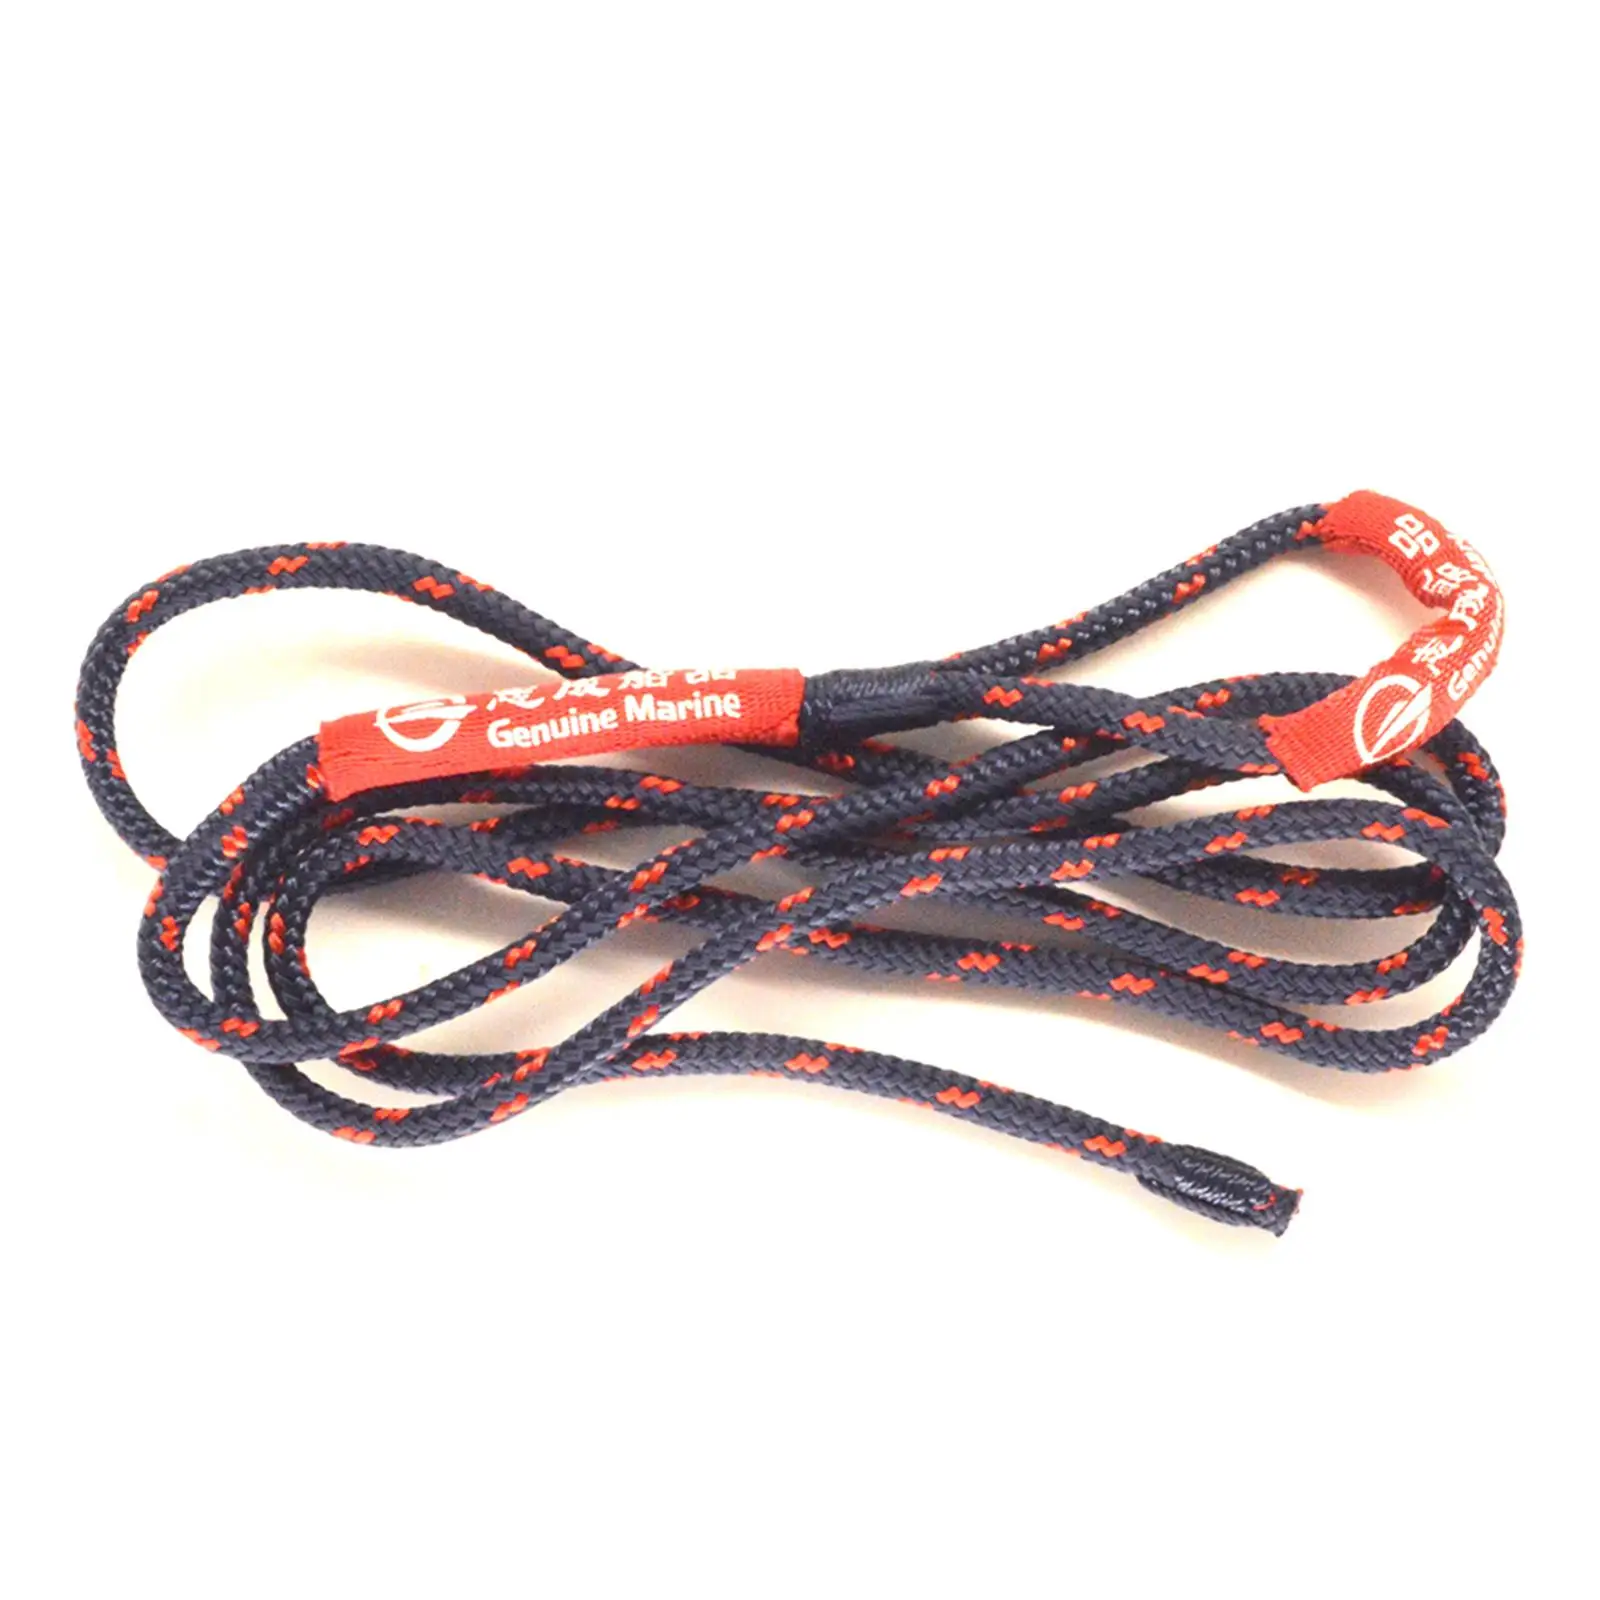 Boat Fender Line UV Resistance with Fender Loop Stretch Resistant Fit for Accessories